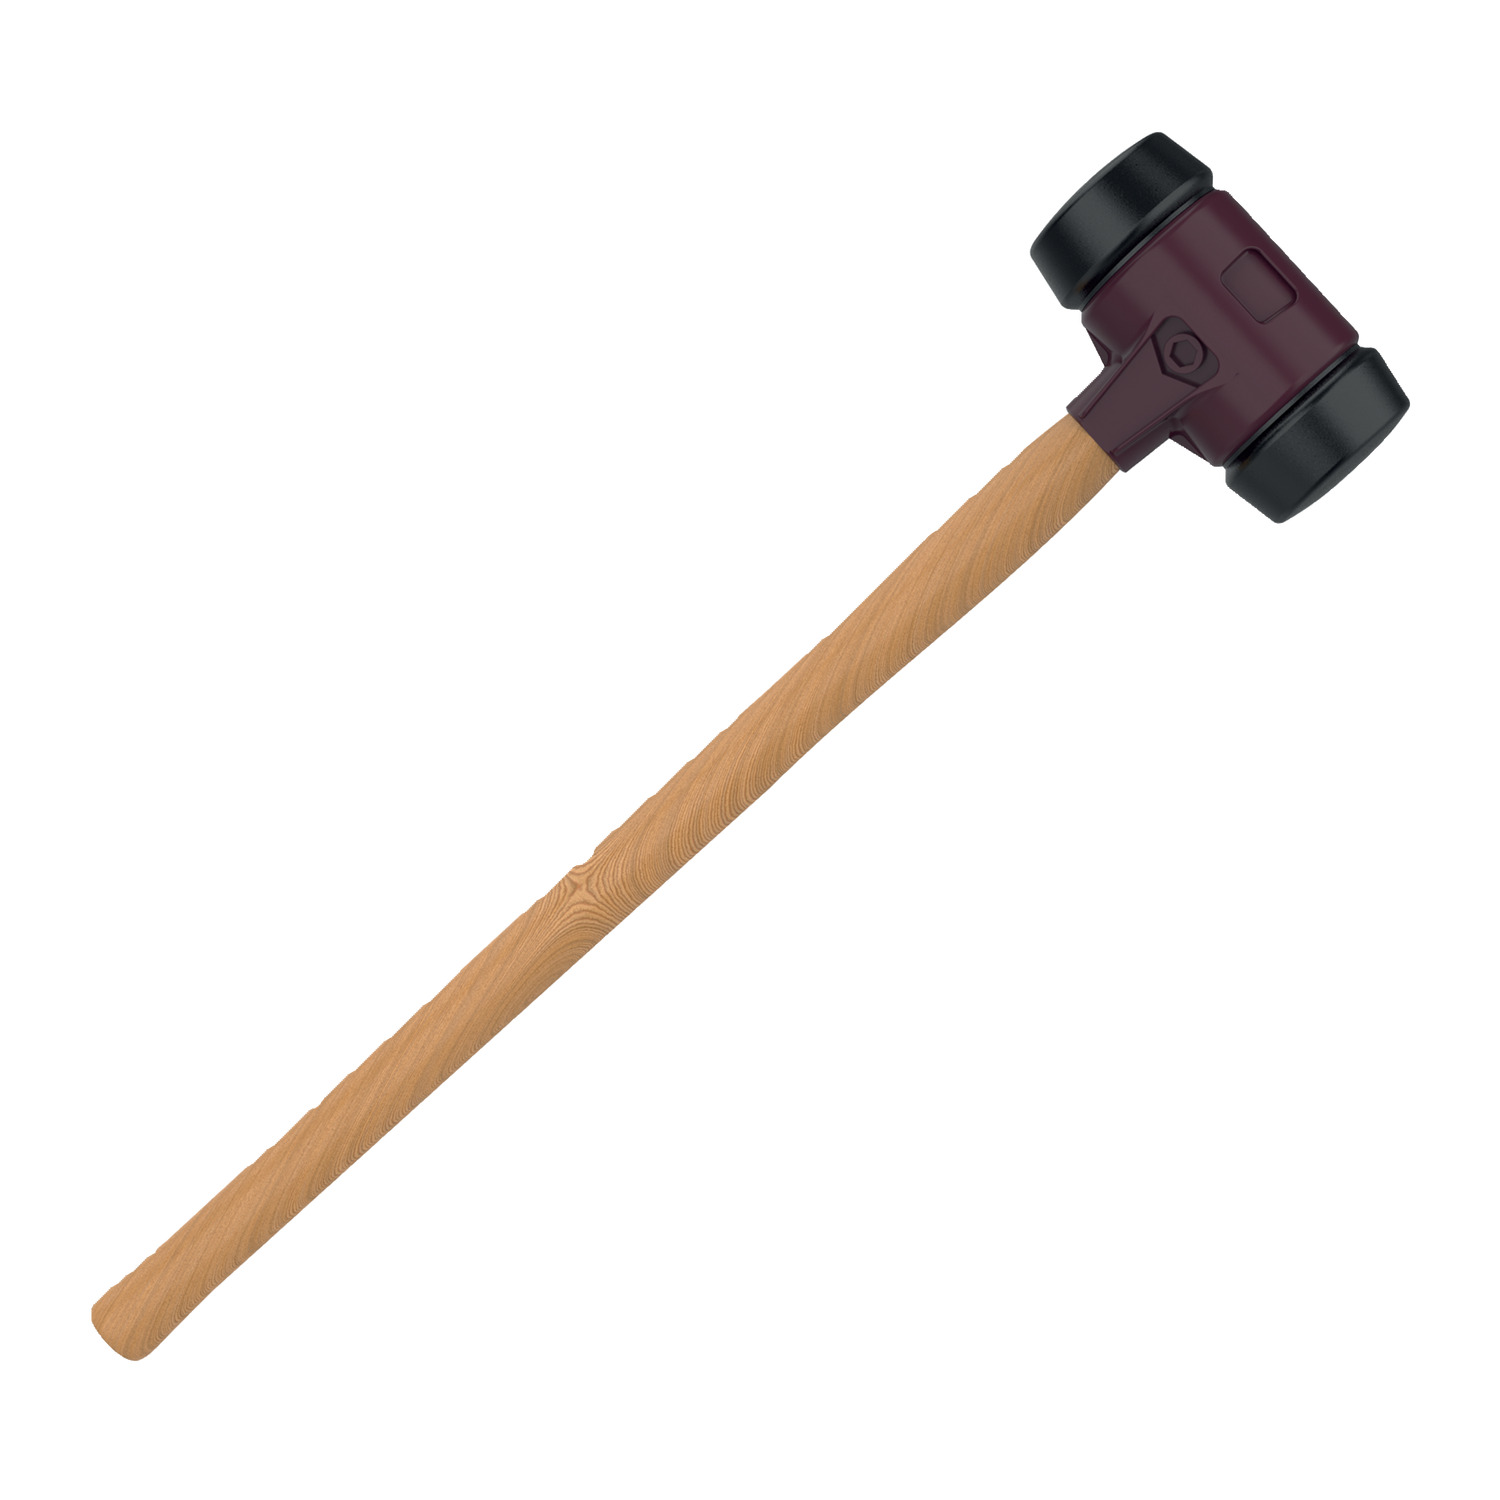 Product 98201, Simplex Sledge Hammer - Complete cast iron housing - wooden handle / 